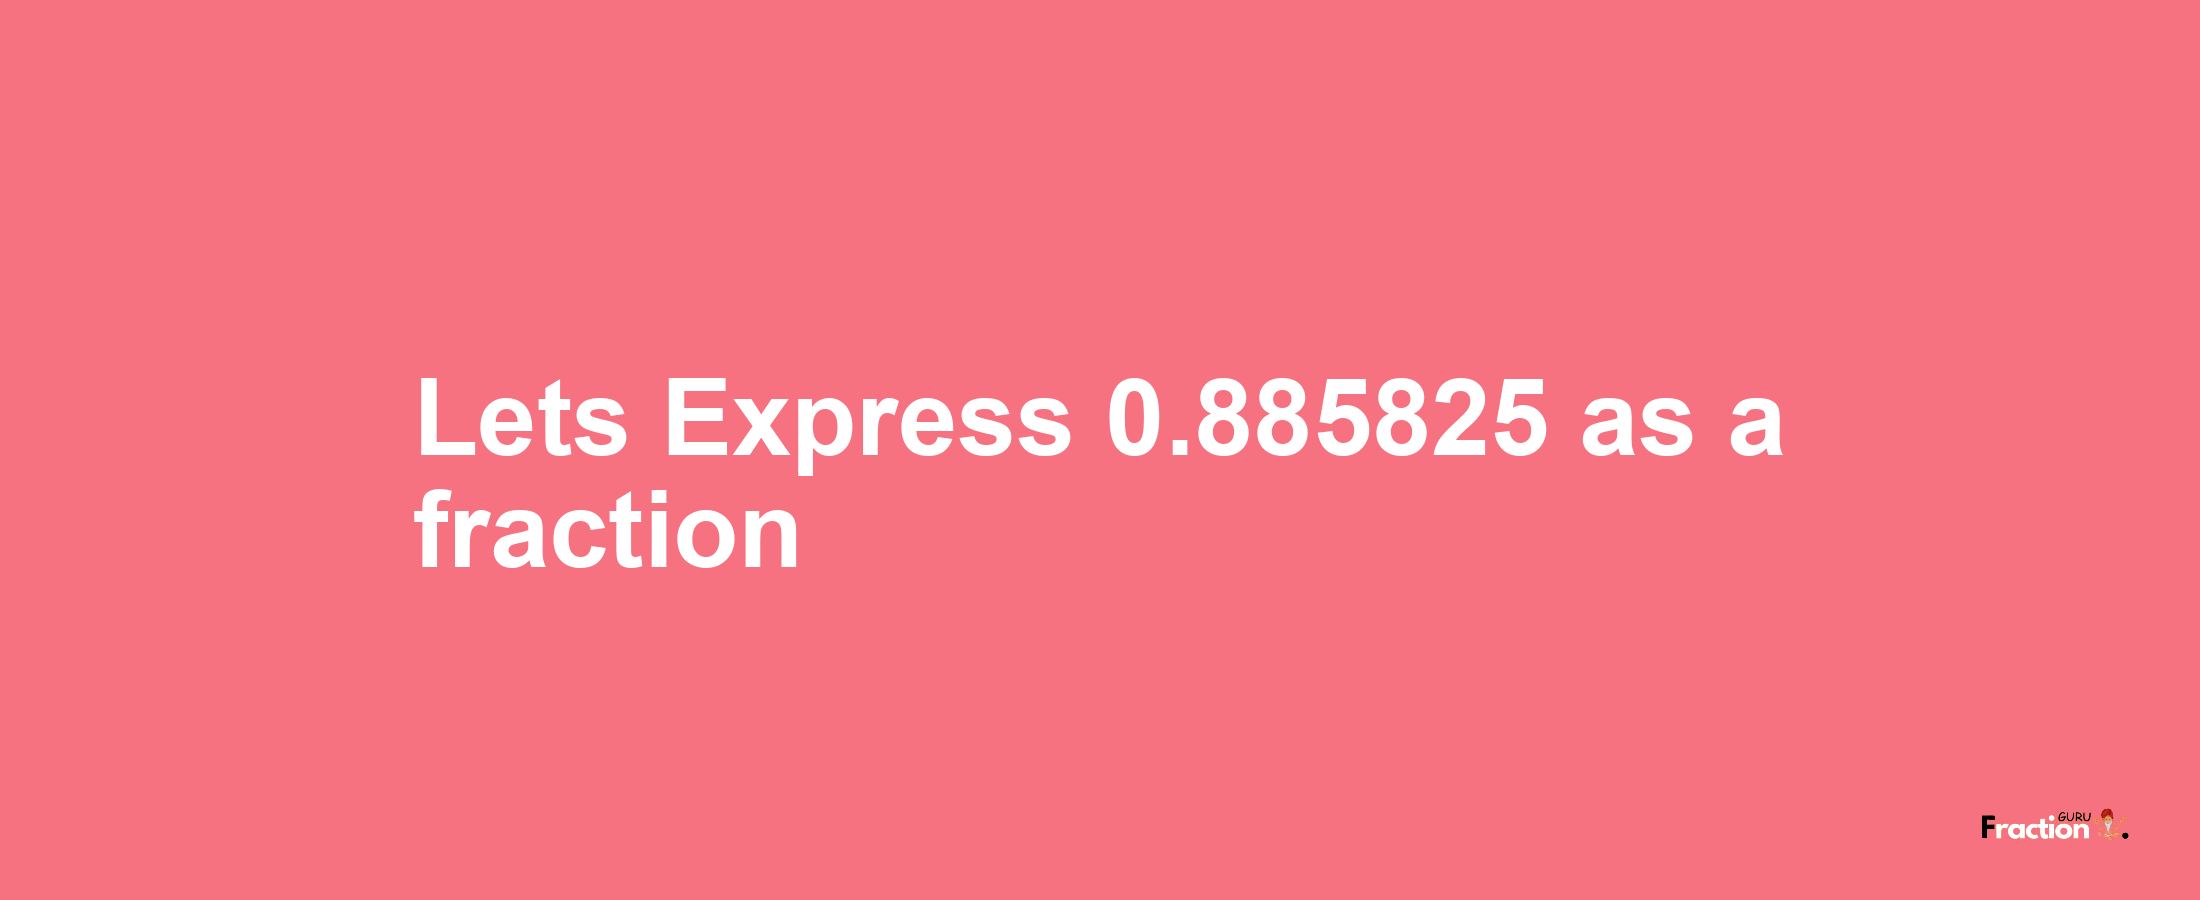 Lets Express 0.885825 as afraction